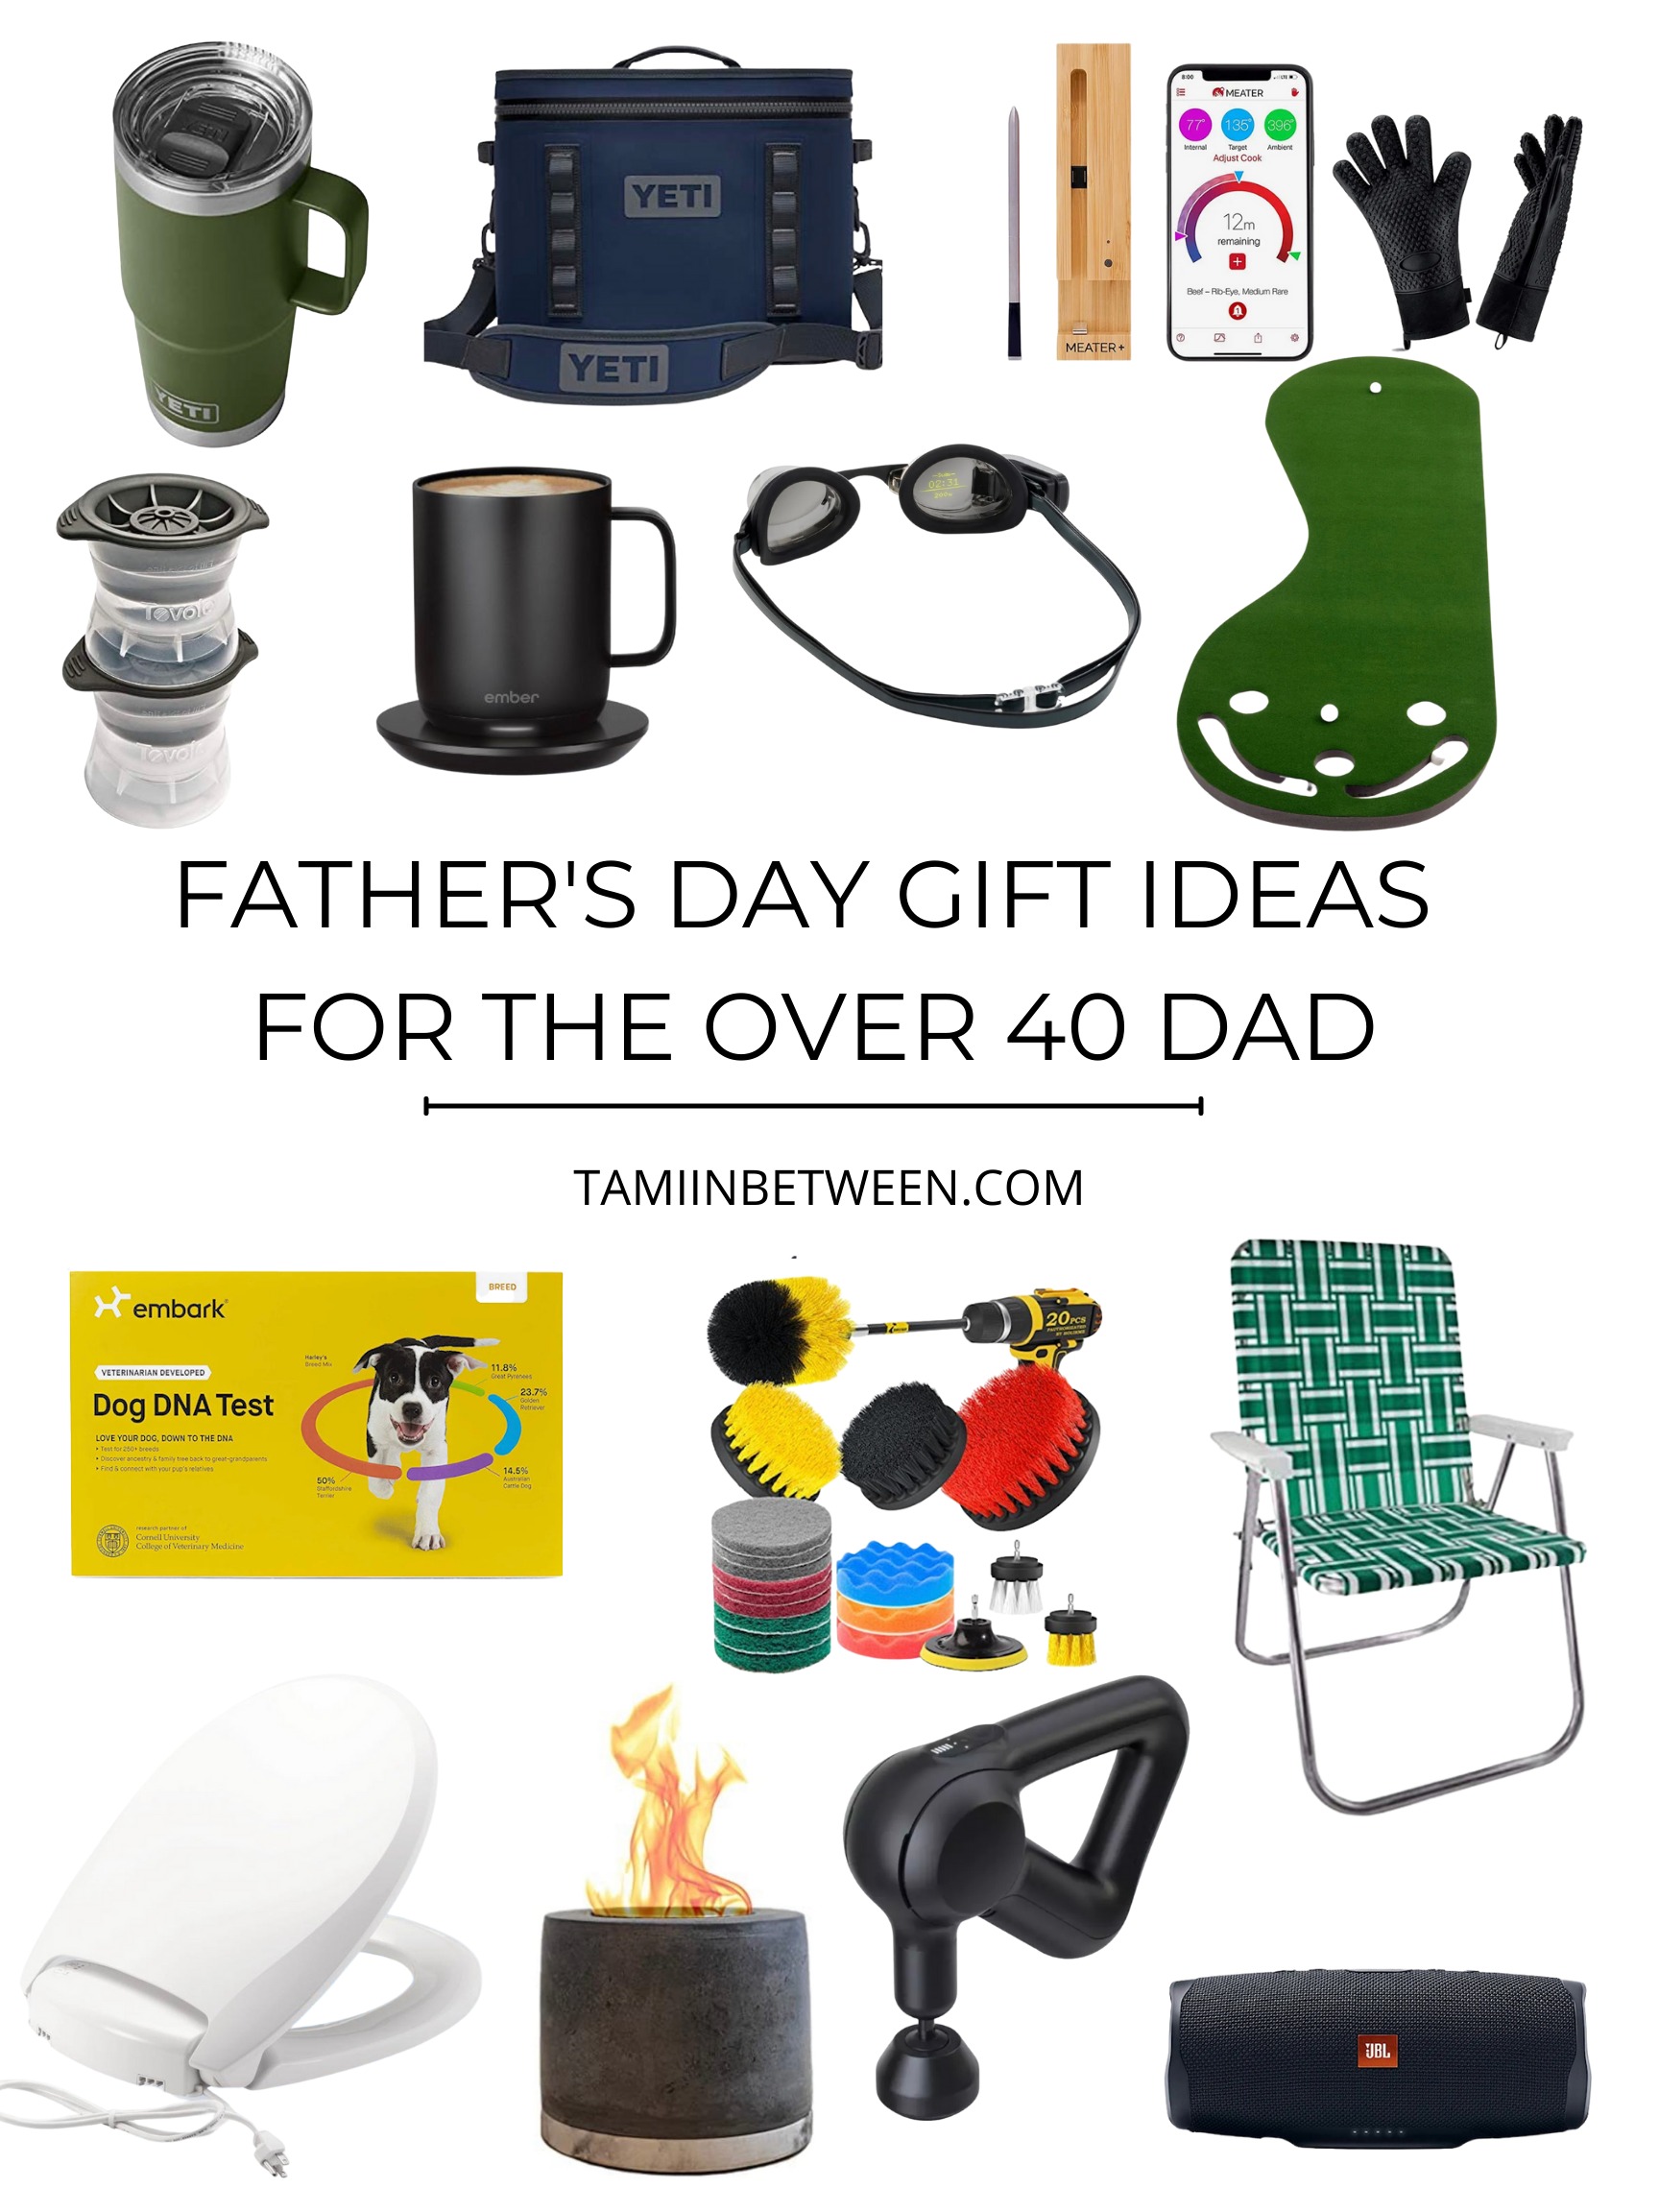 Flat lay of Father's Day gift ideas